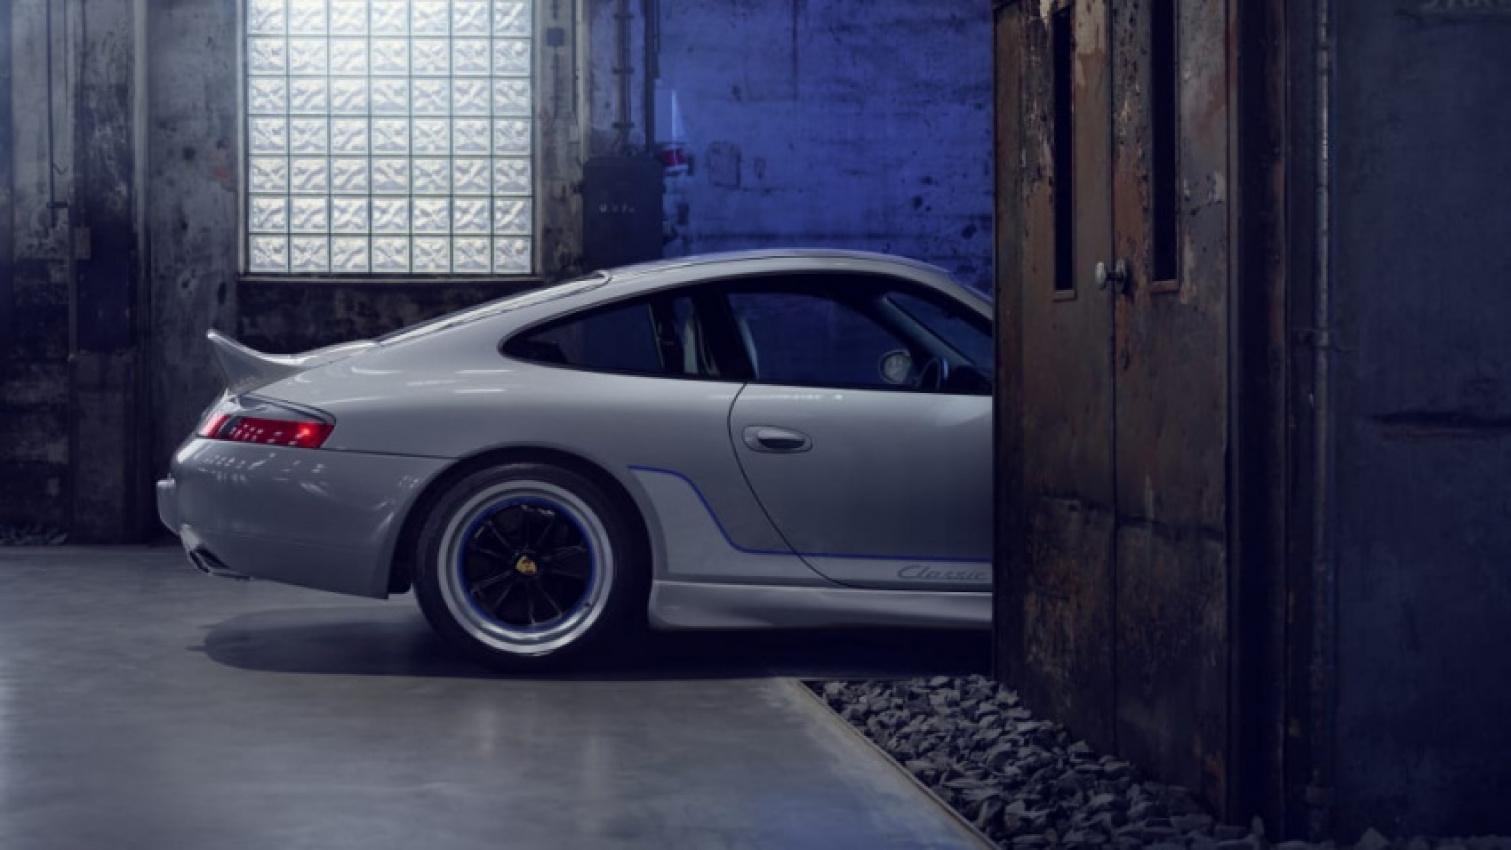 autos, cars, porsche, android, coupe, luxury, performance, android, porsche 911 classic club coupe revealed as an epic 996 restoration